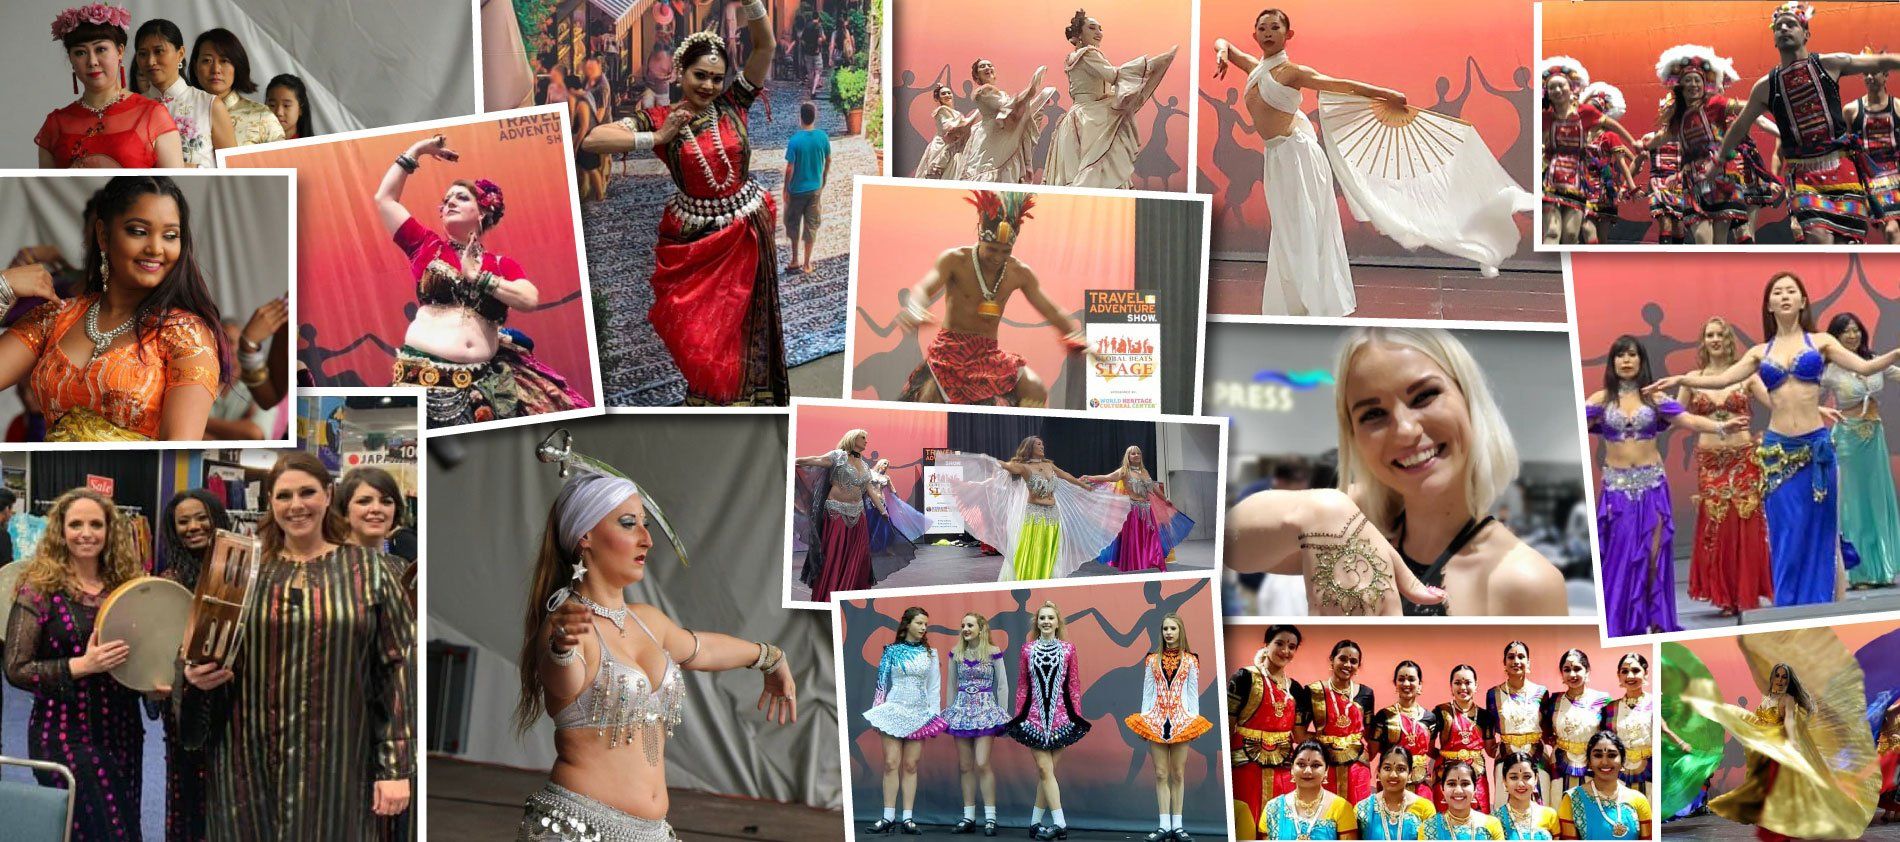 collage showcase of traditional dress and performance arts